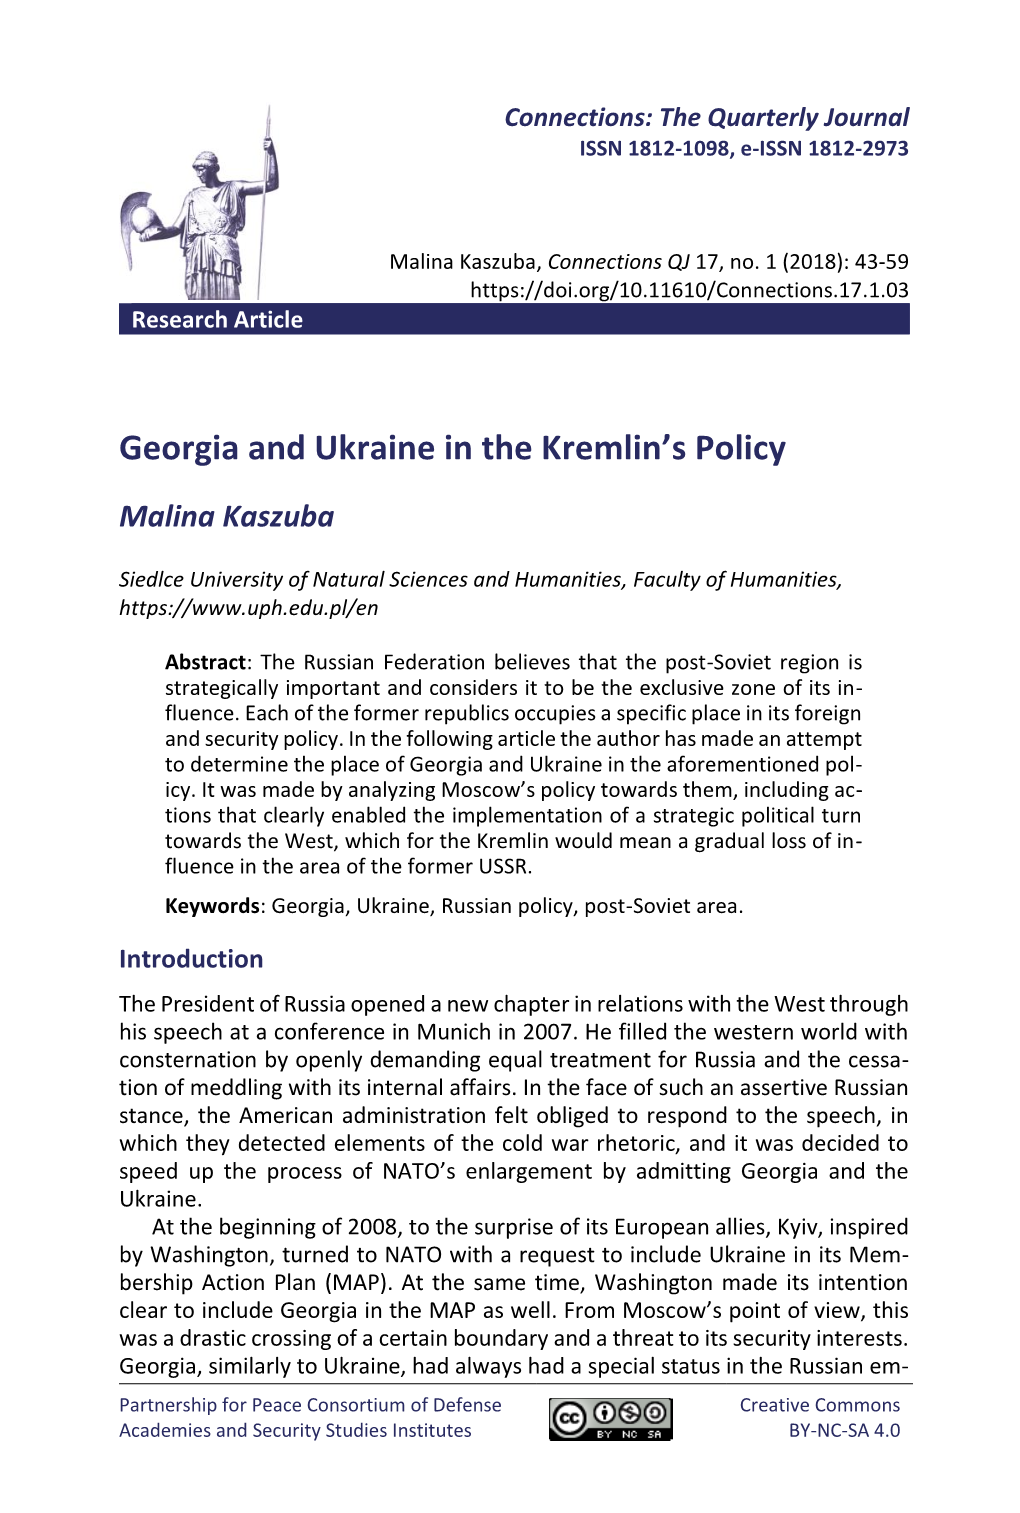 Georgia and Ukraine in the Kremlin's Policy